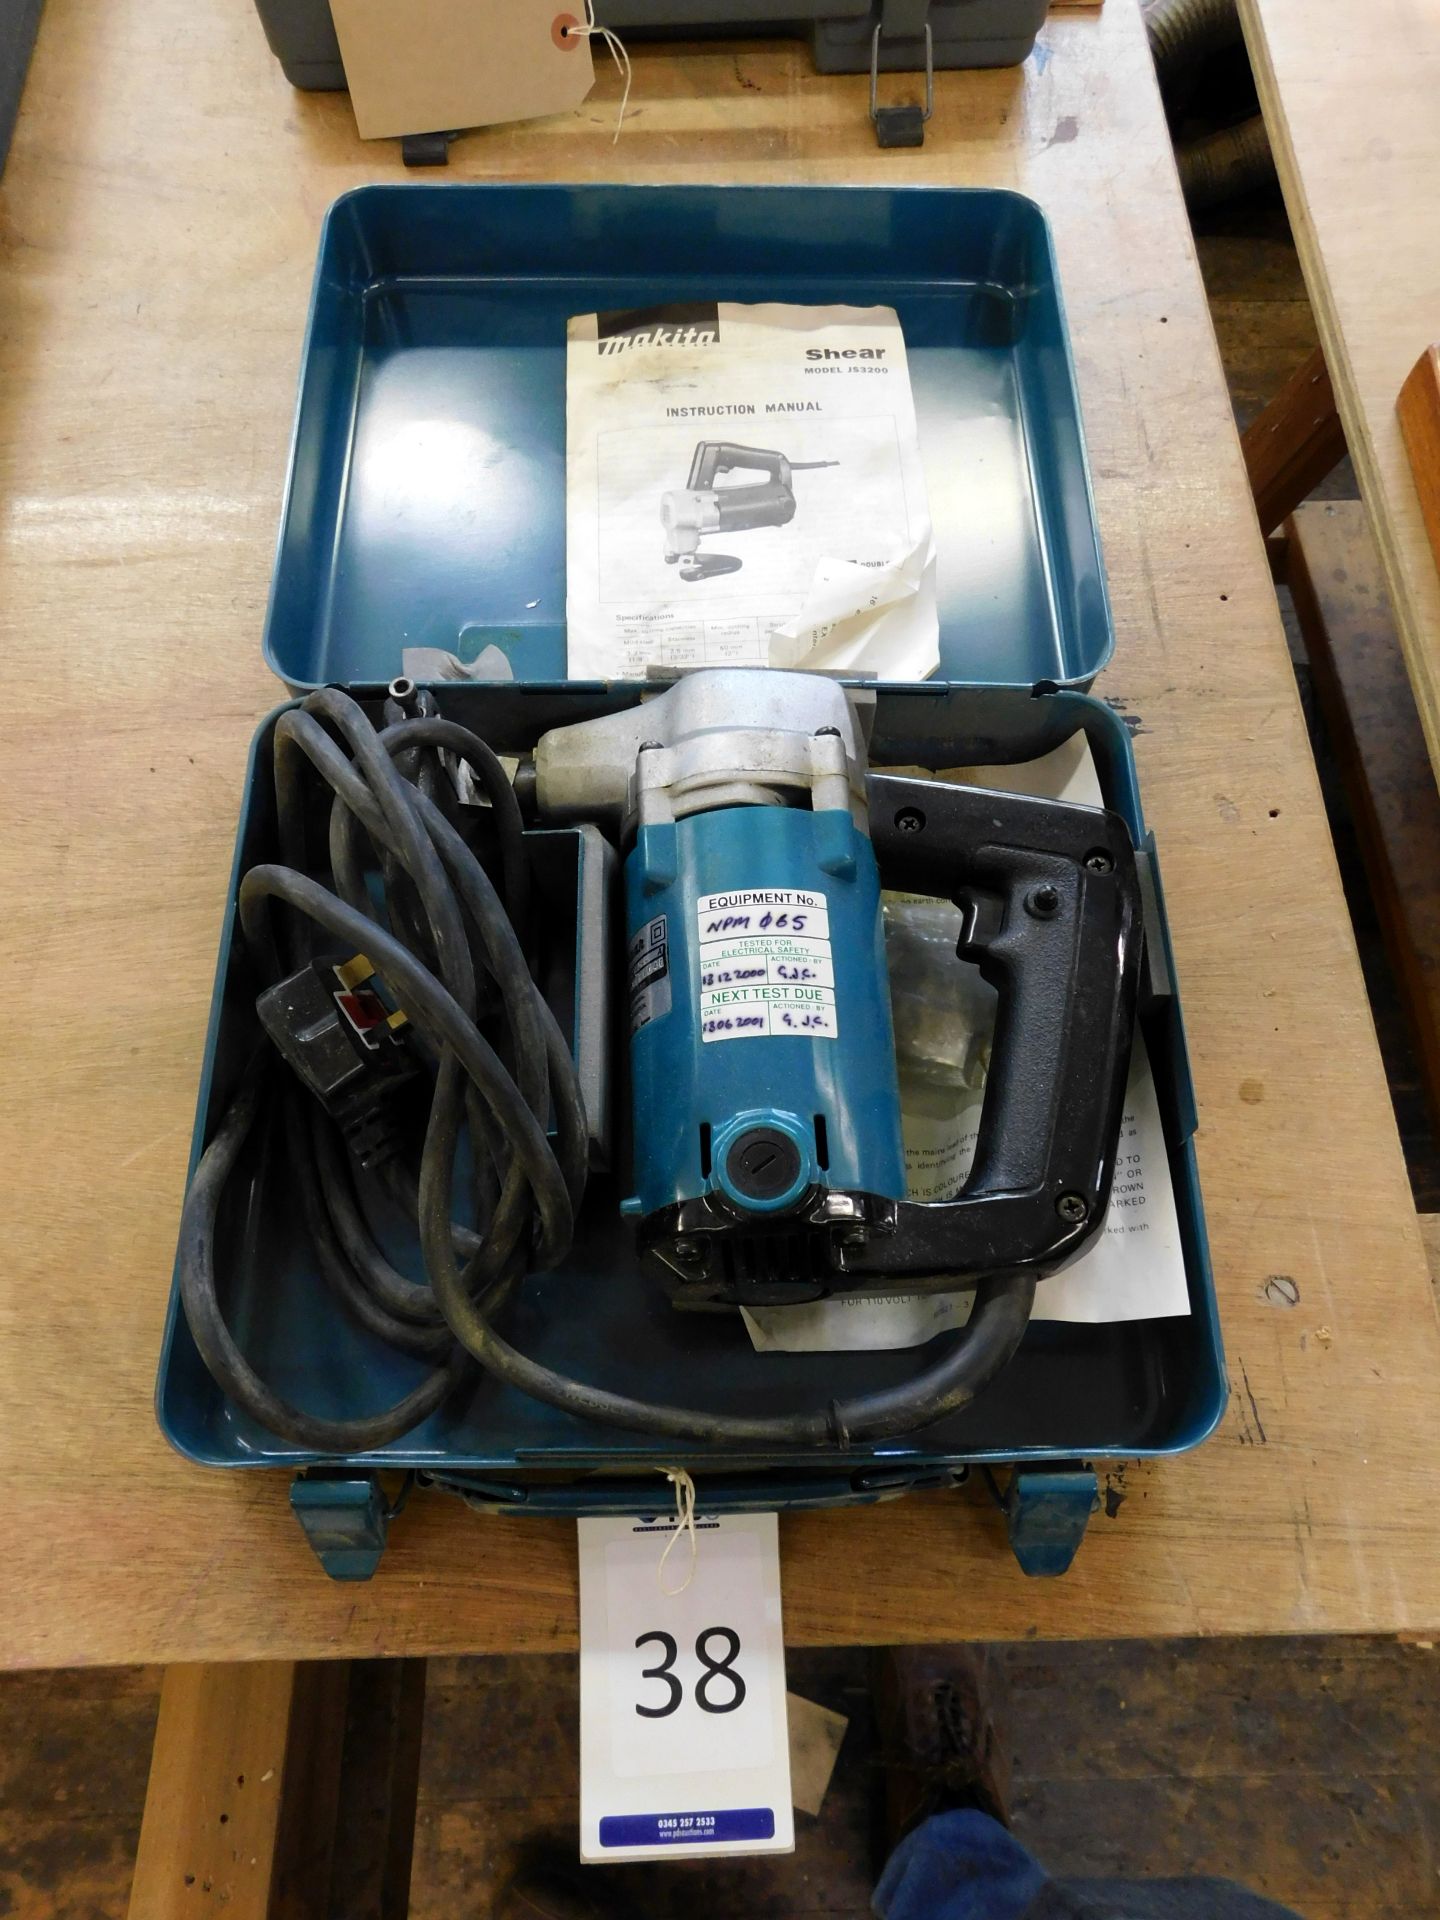 Makita JS3200 240v Metal Sheer (Located Bethnal Green – Please see General Notes for More Detail)